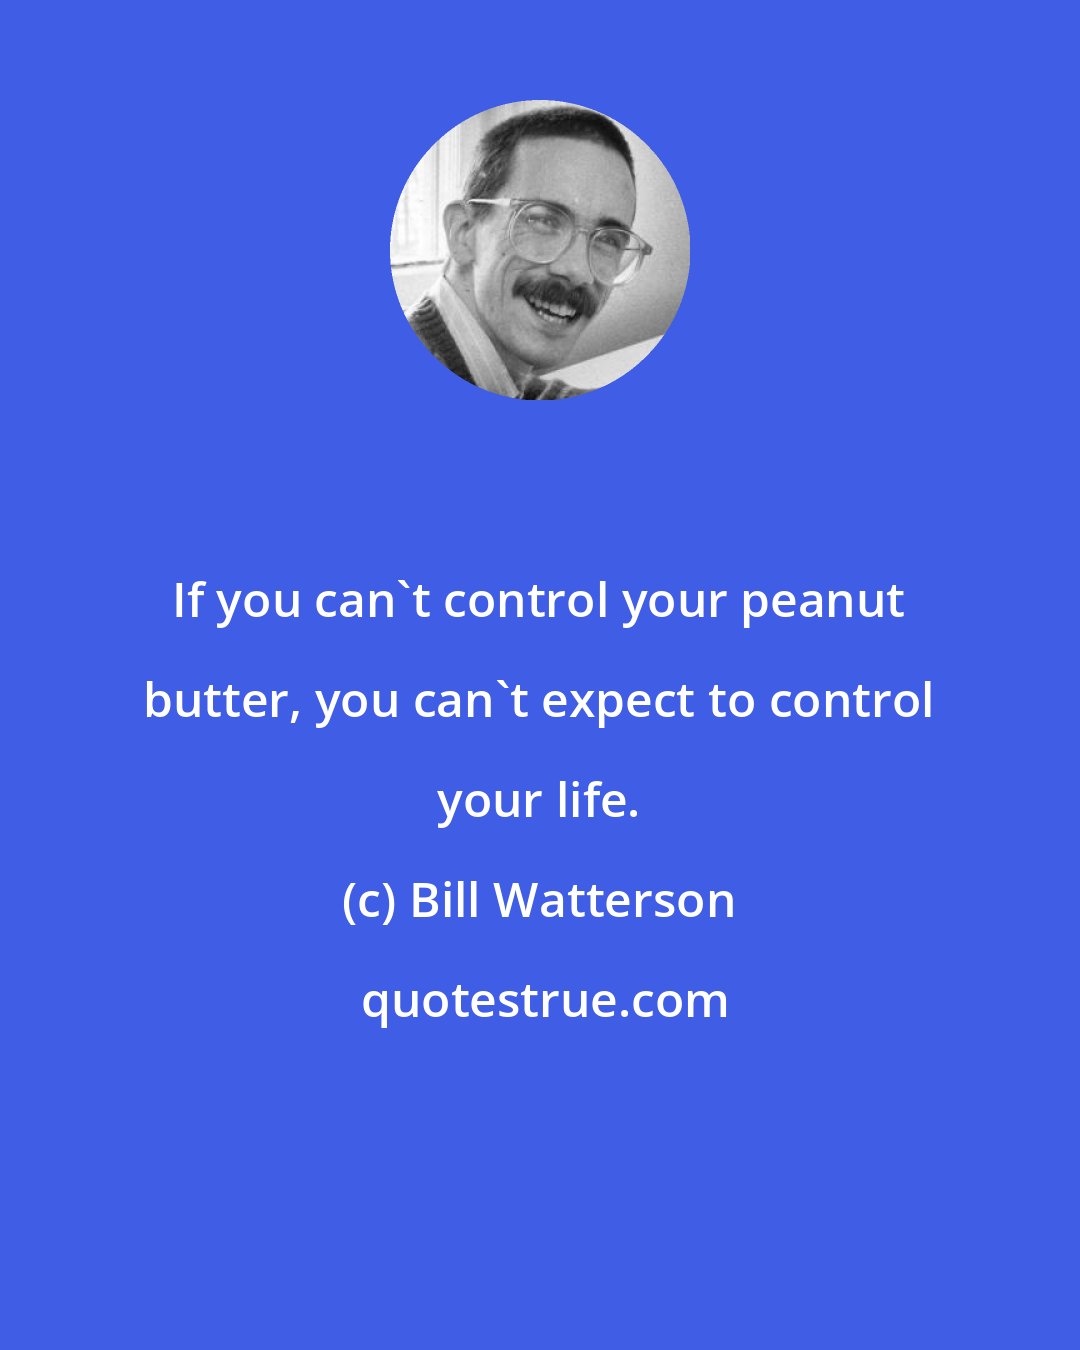 Bill Watterson: If you can't control your peanut butter, you can't expect to control your life.